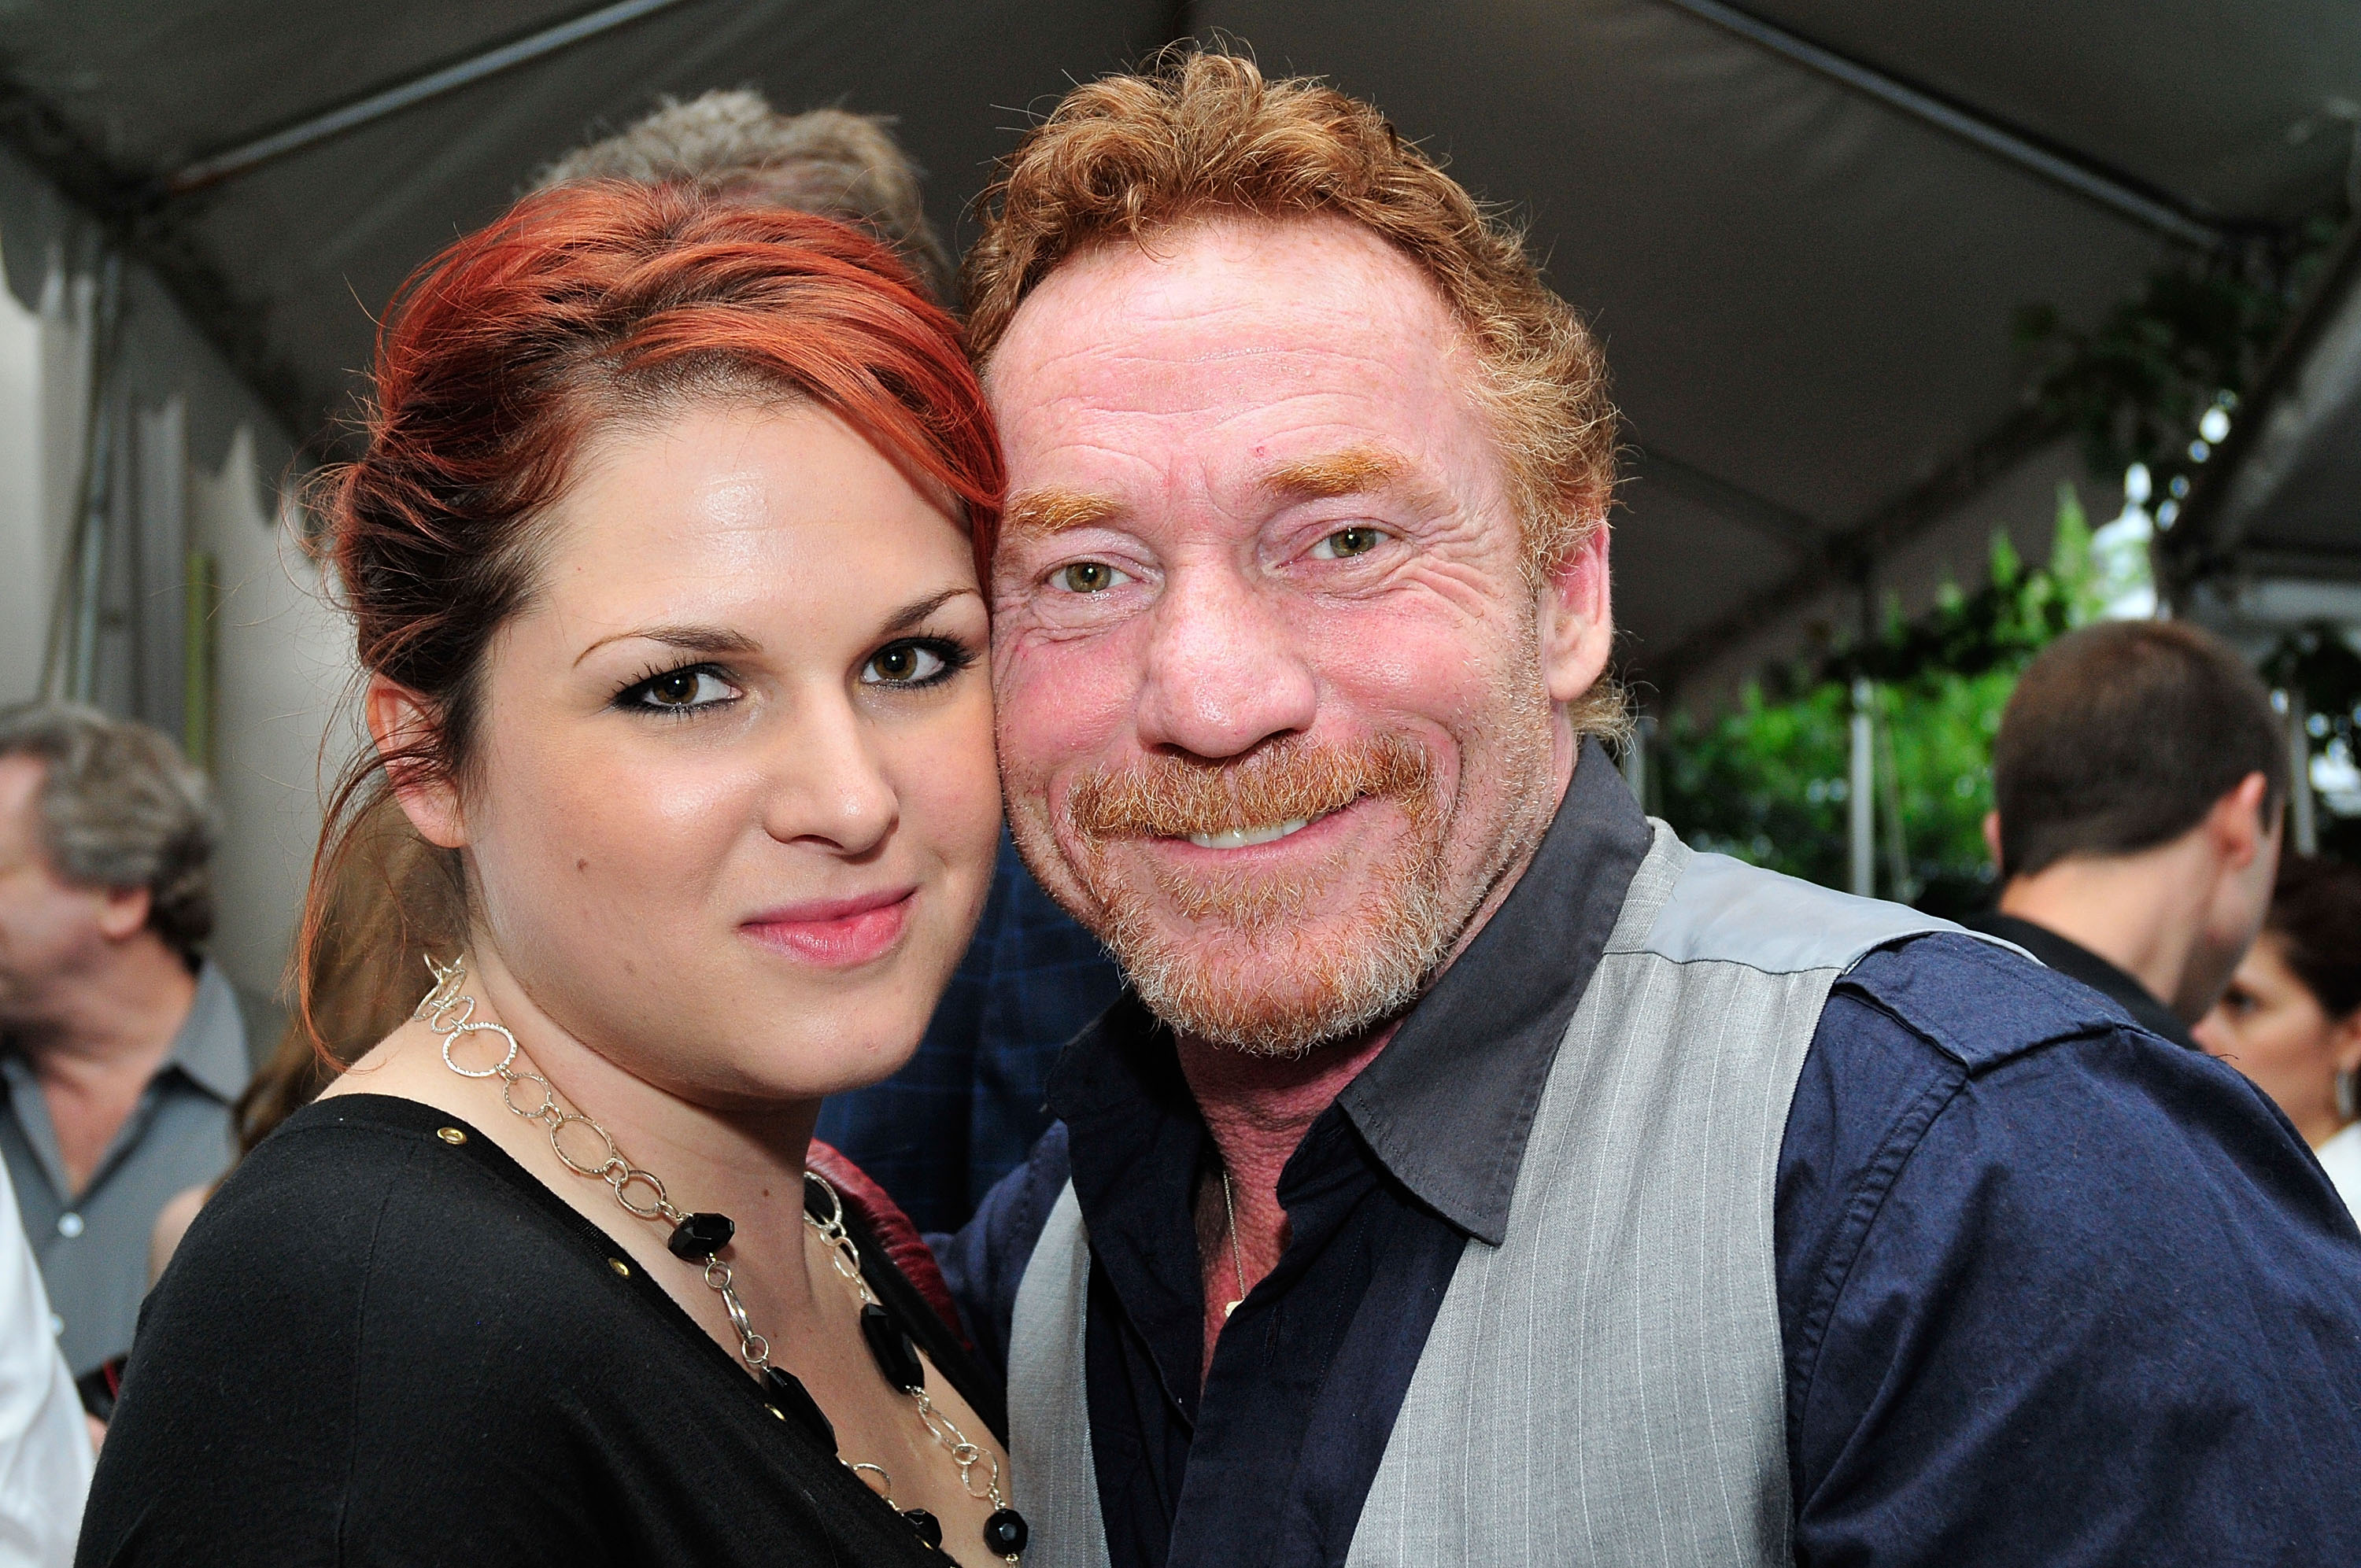 Danny Bonaduce and Amy Railsback attend the 4th annual Great Chefs Event Benefiting Alex's Lemonade Stand Foundation at Osteria Restaurant on June 17, 2009, in Philadelphia, Pennsylvania. | Source: Getty Images